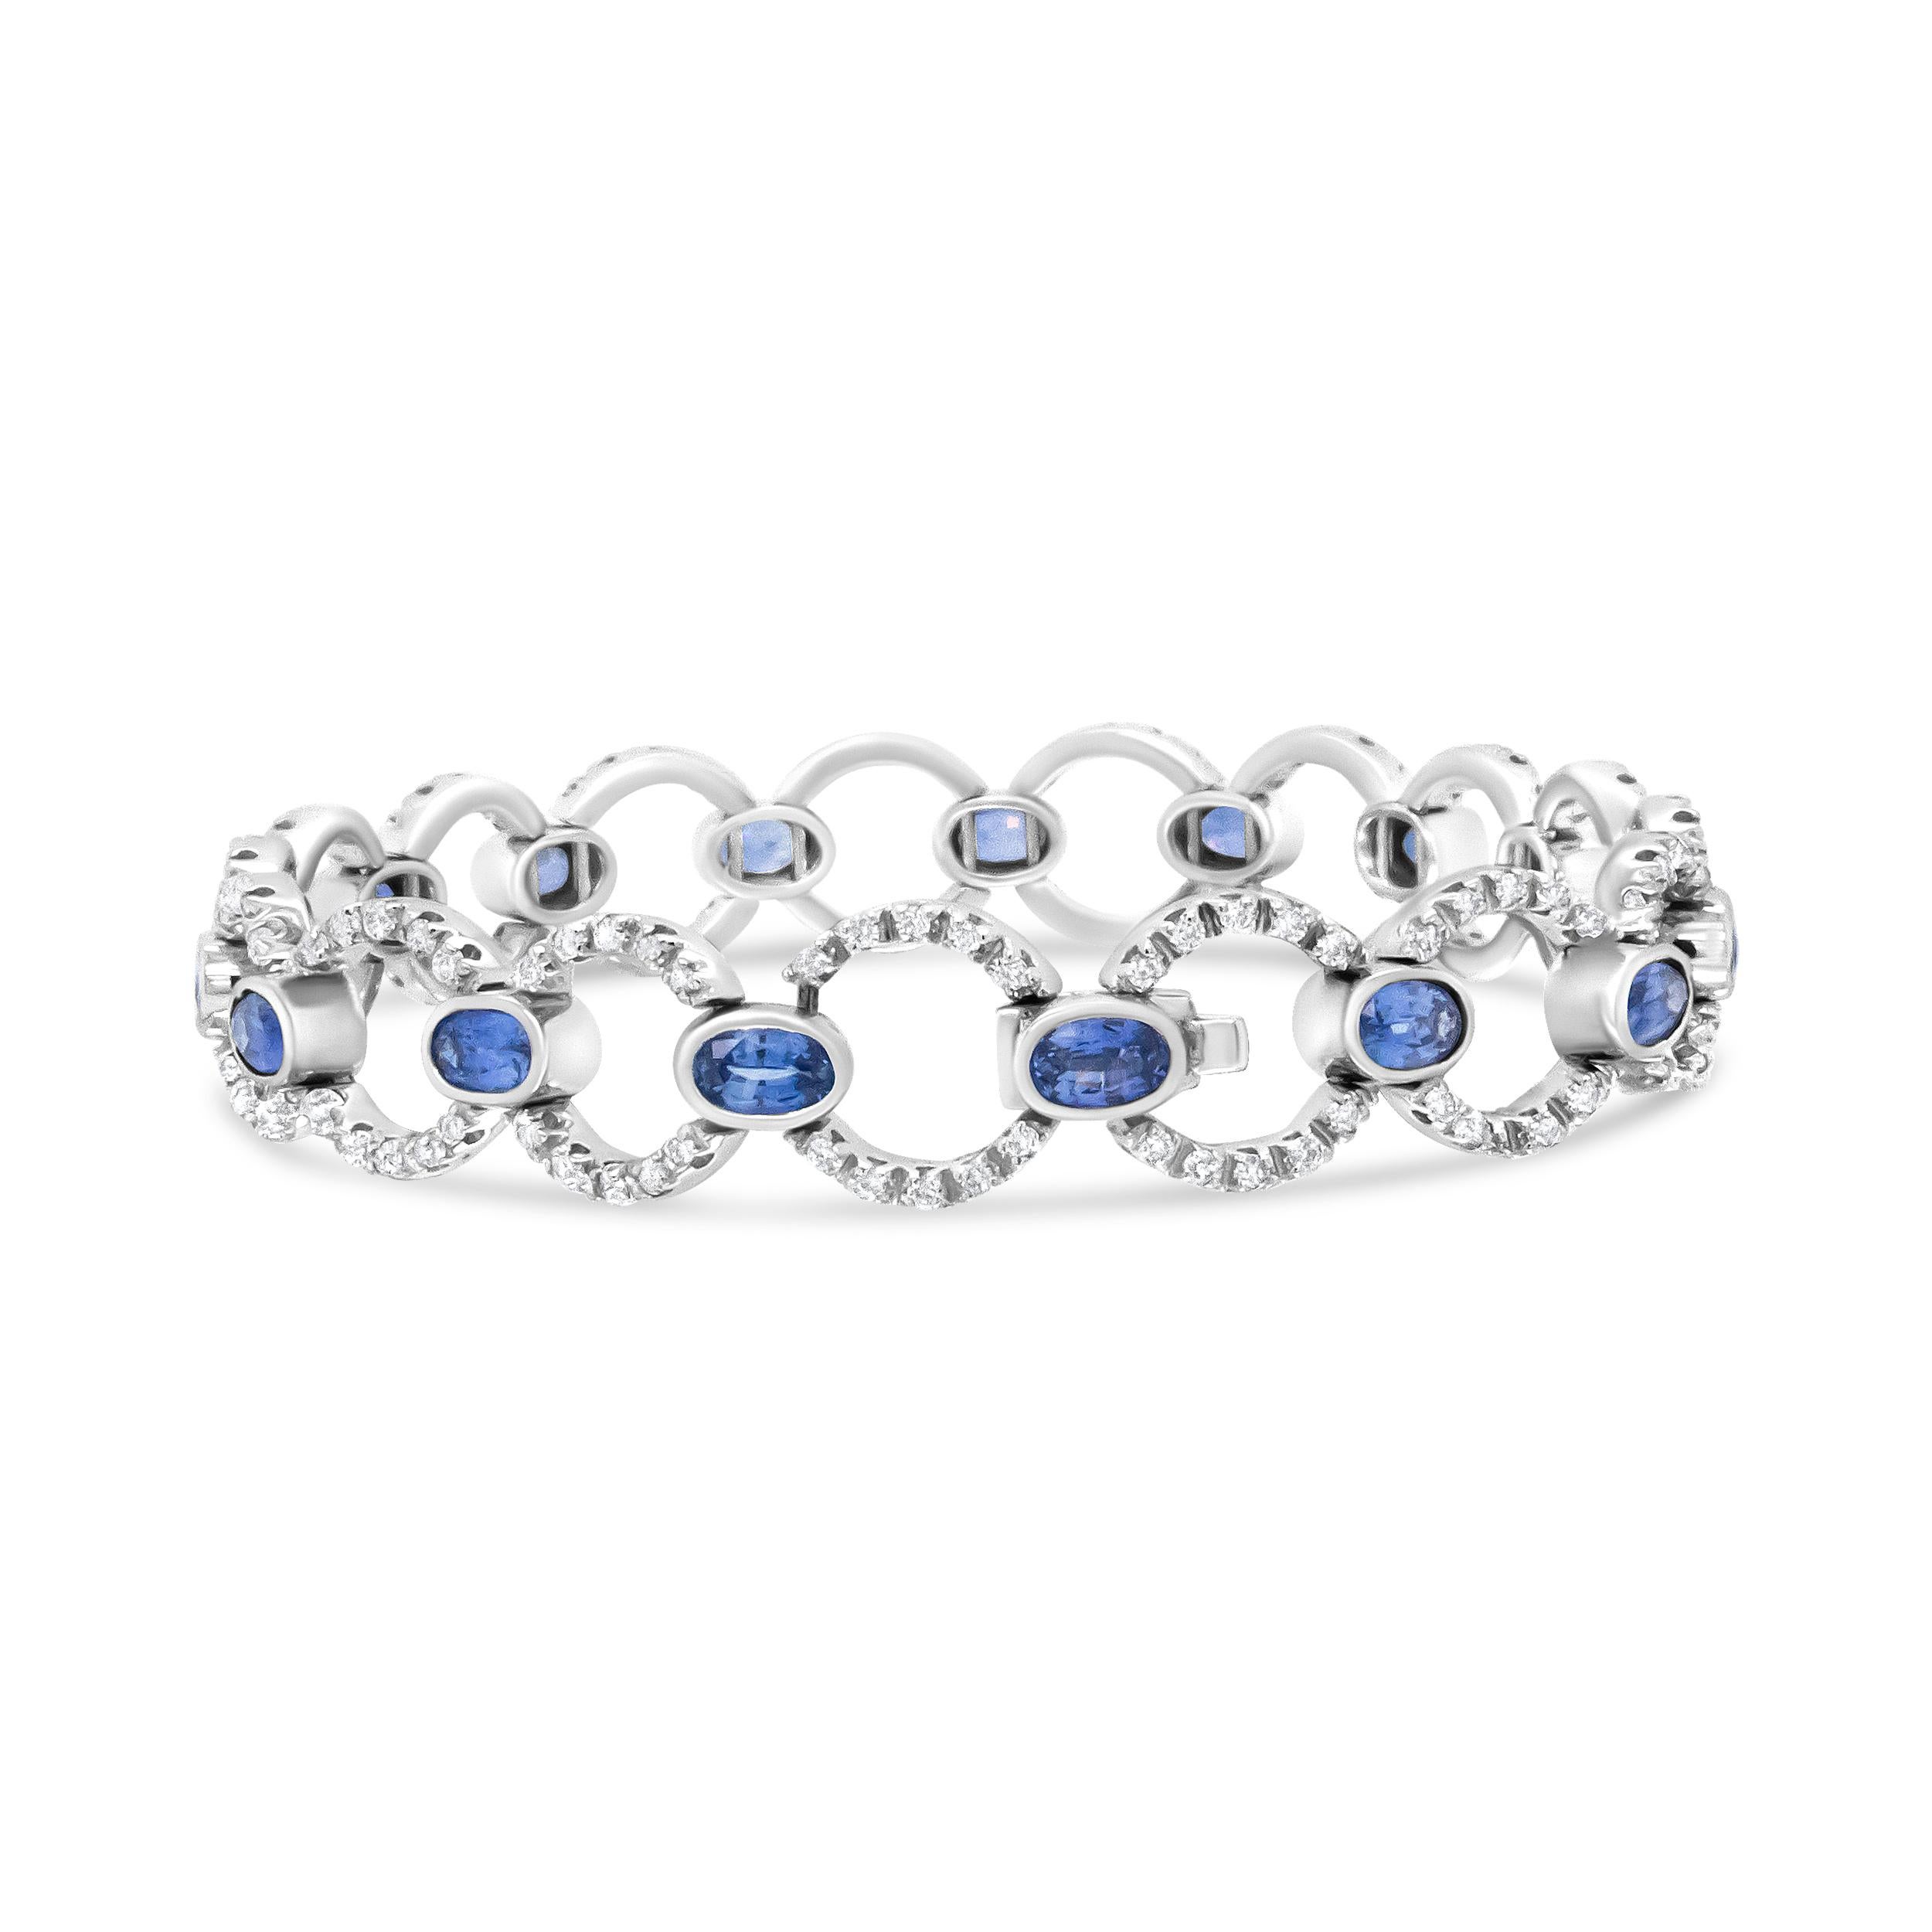 This luxury 18k white gold link bracelet showcases a shimmering circle links set with glorious round white diamonds in prong settings. These sparkling stones total 6 cttw with an approximate F-G Color and SI1-SI2 Clarity. Each circle link is